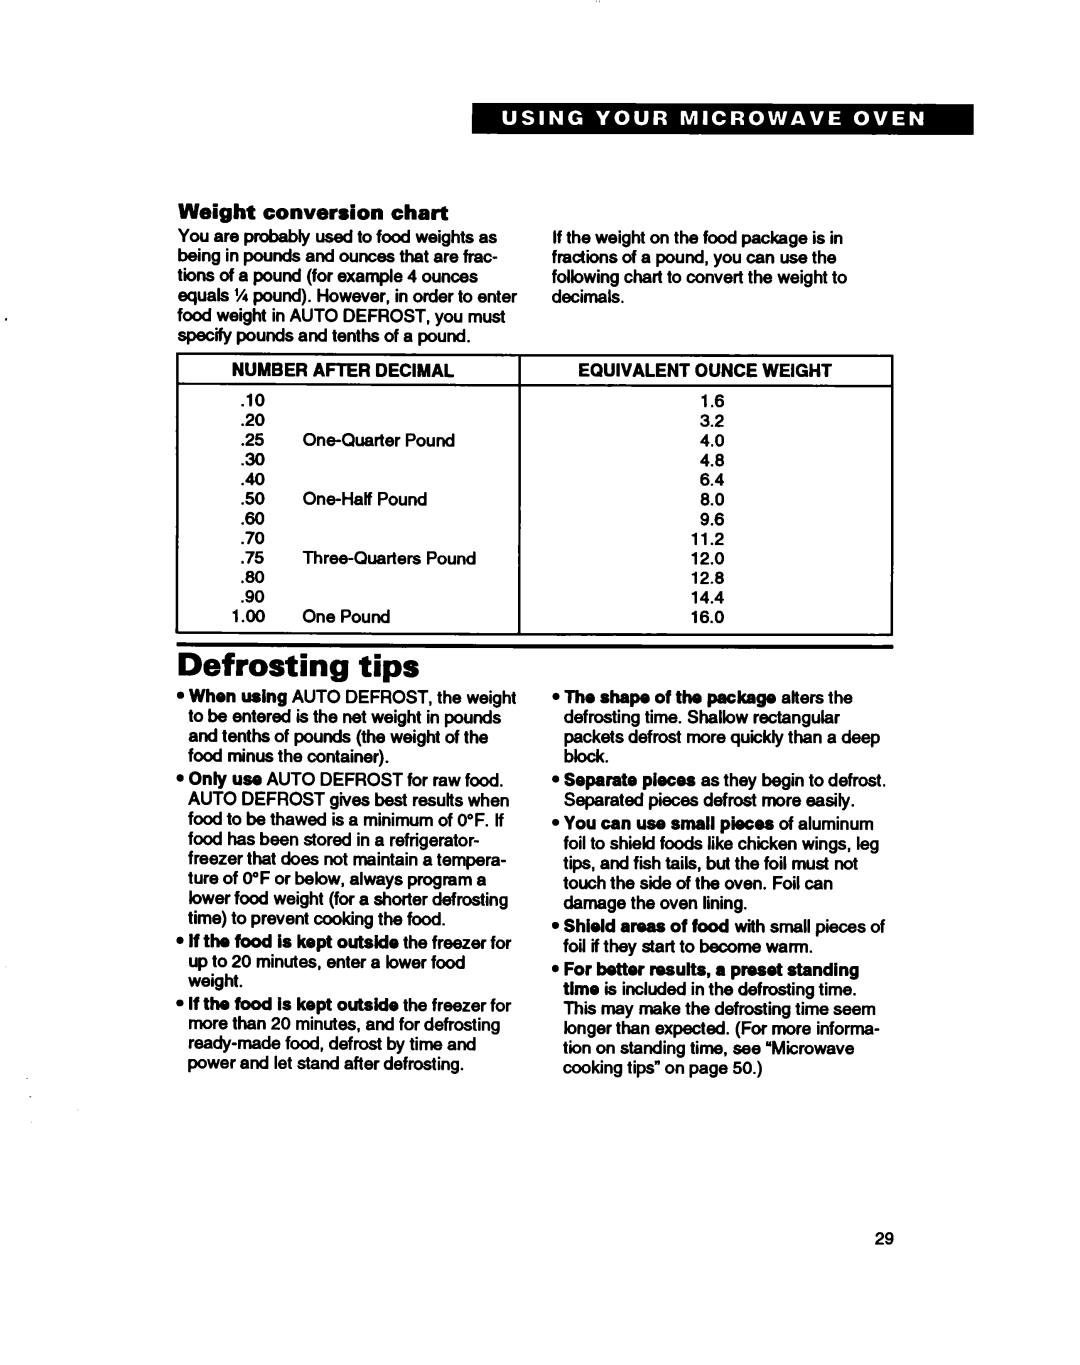 Whirlpool MH7115XB warranty Defrosting tips, Weight conversion chart, Number After Decimal, 30 A0, Equivalent Ounce Weight 